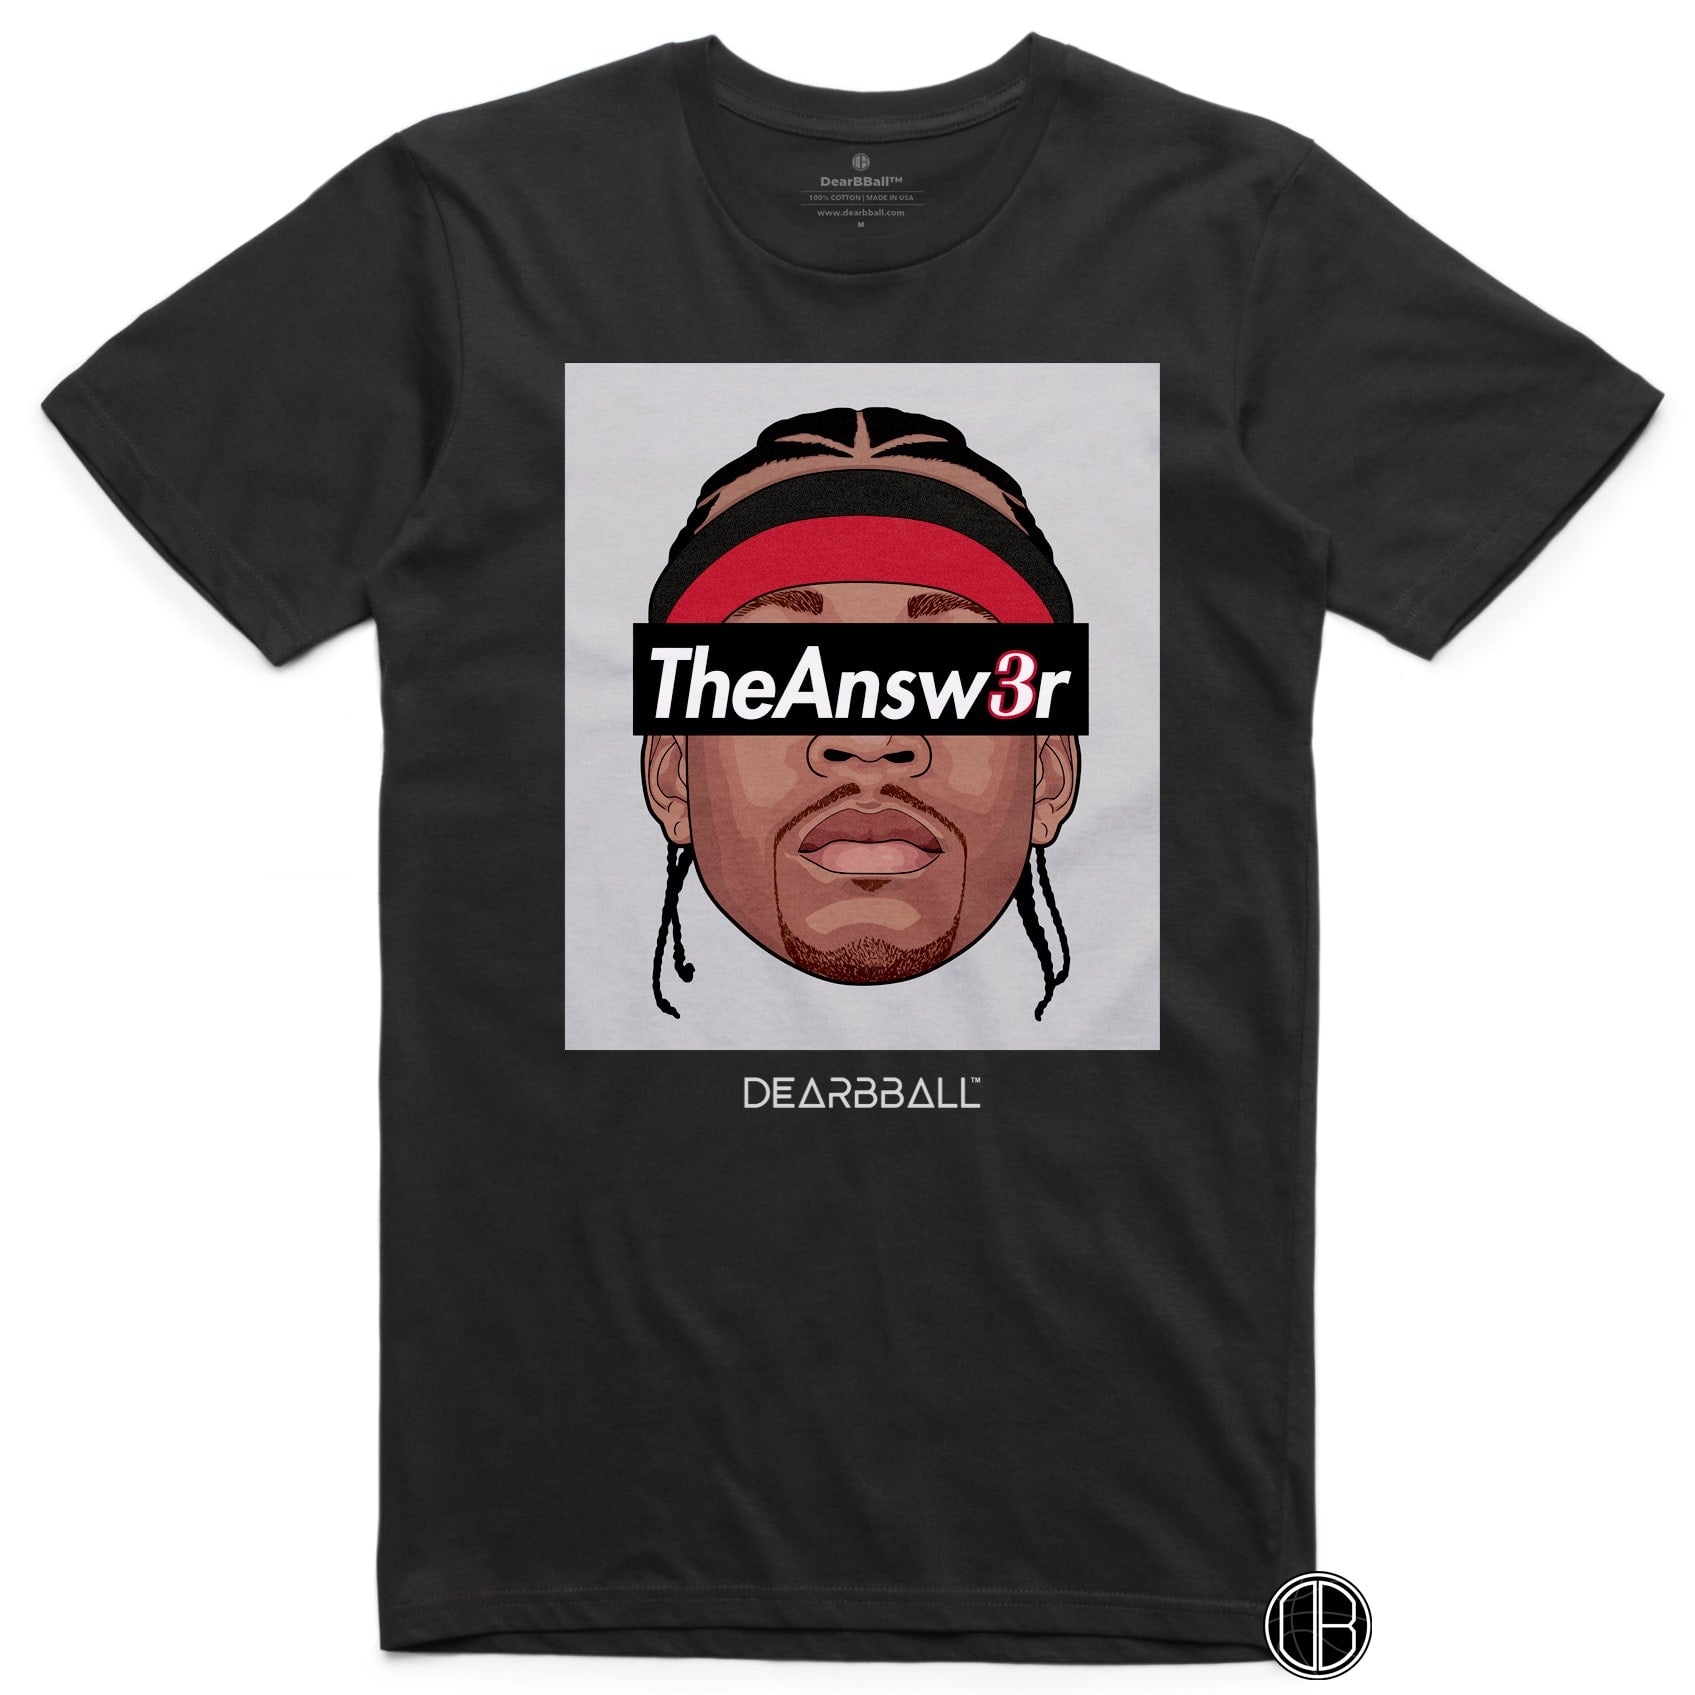 DearBBall T-Shirt - The Answer 3 Edition